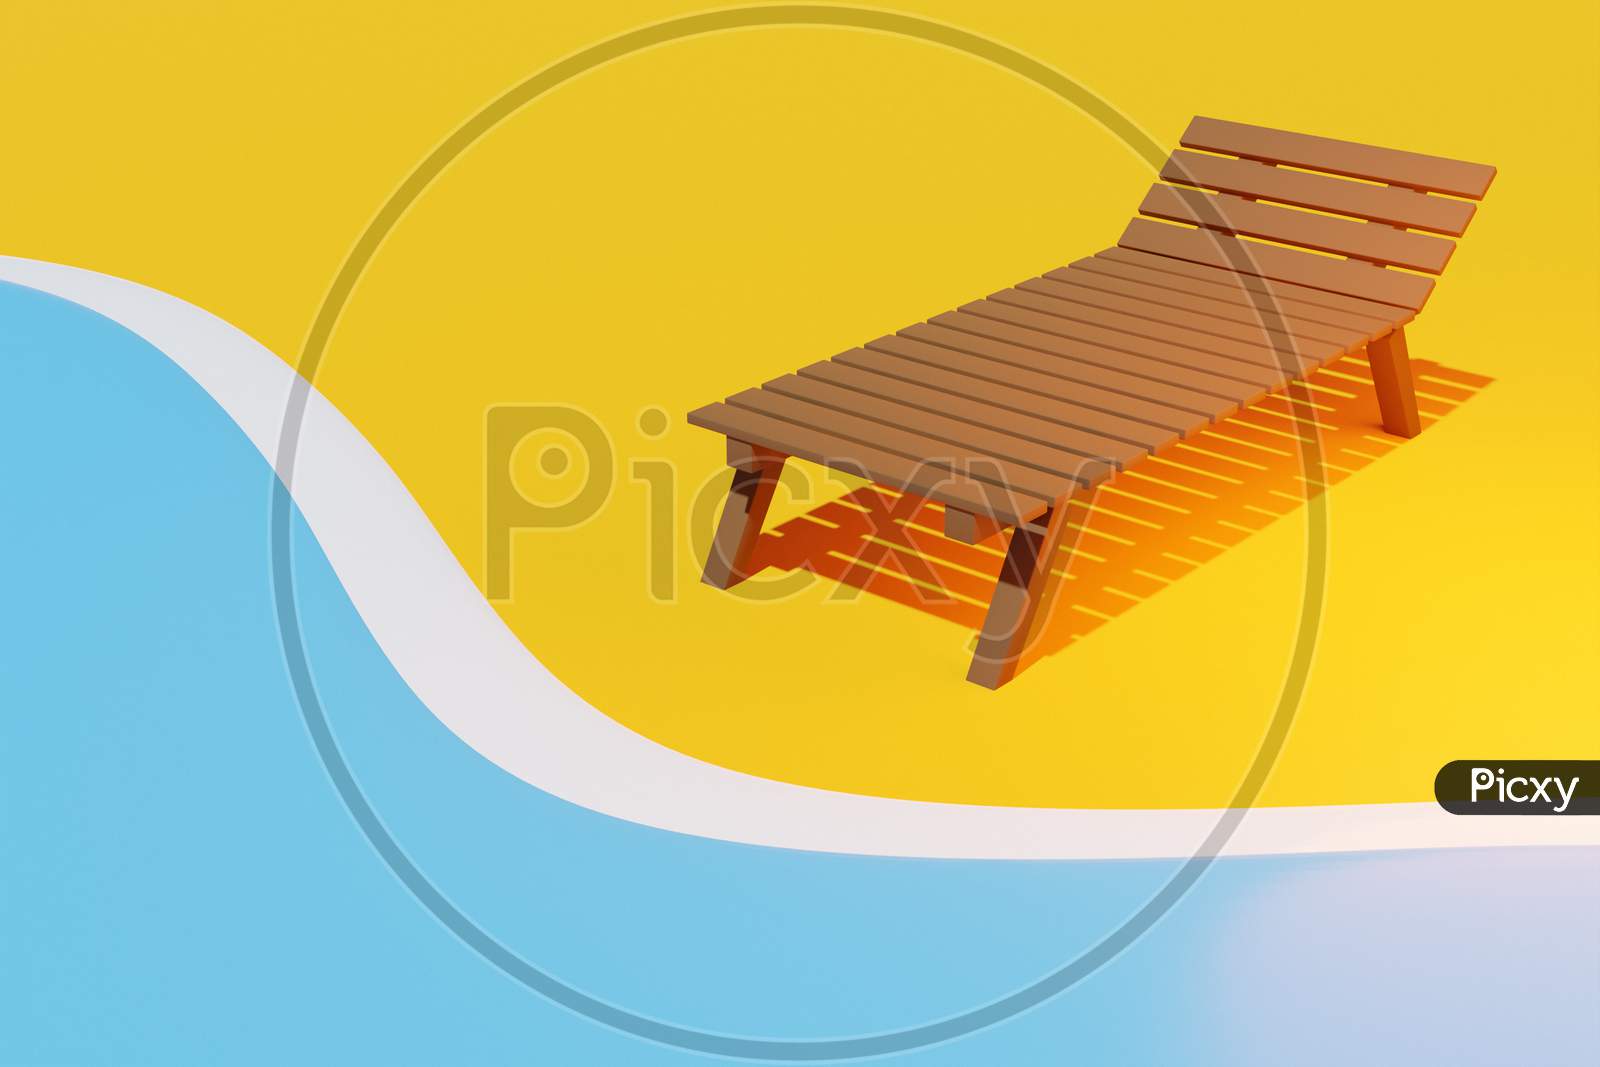 3D Illustration Of A Summer Beach. Seaside With A Sun Lounger On The Sand. Summer Background Illustration For Beach Holiday